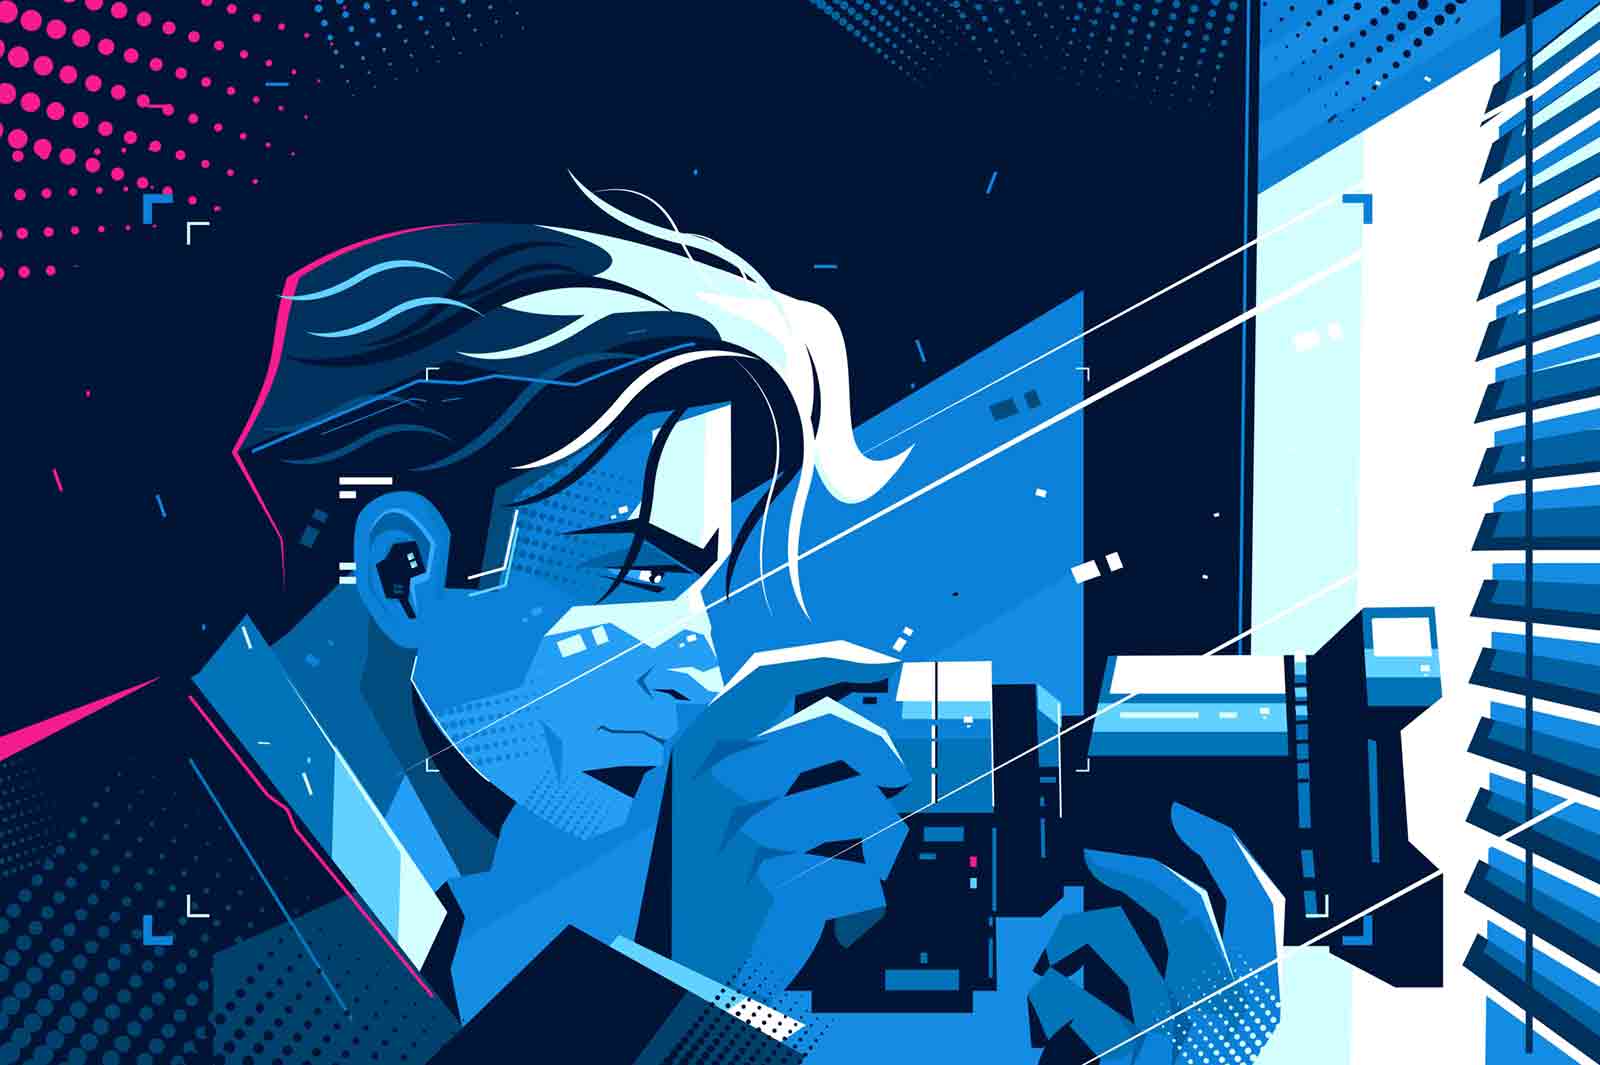 Detective with photo camera vector illustration. Young man spying on someone with digital camcorder indoors of secret apartment flat style design. Keeker at work concept